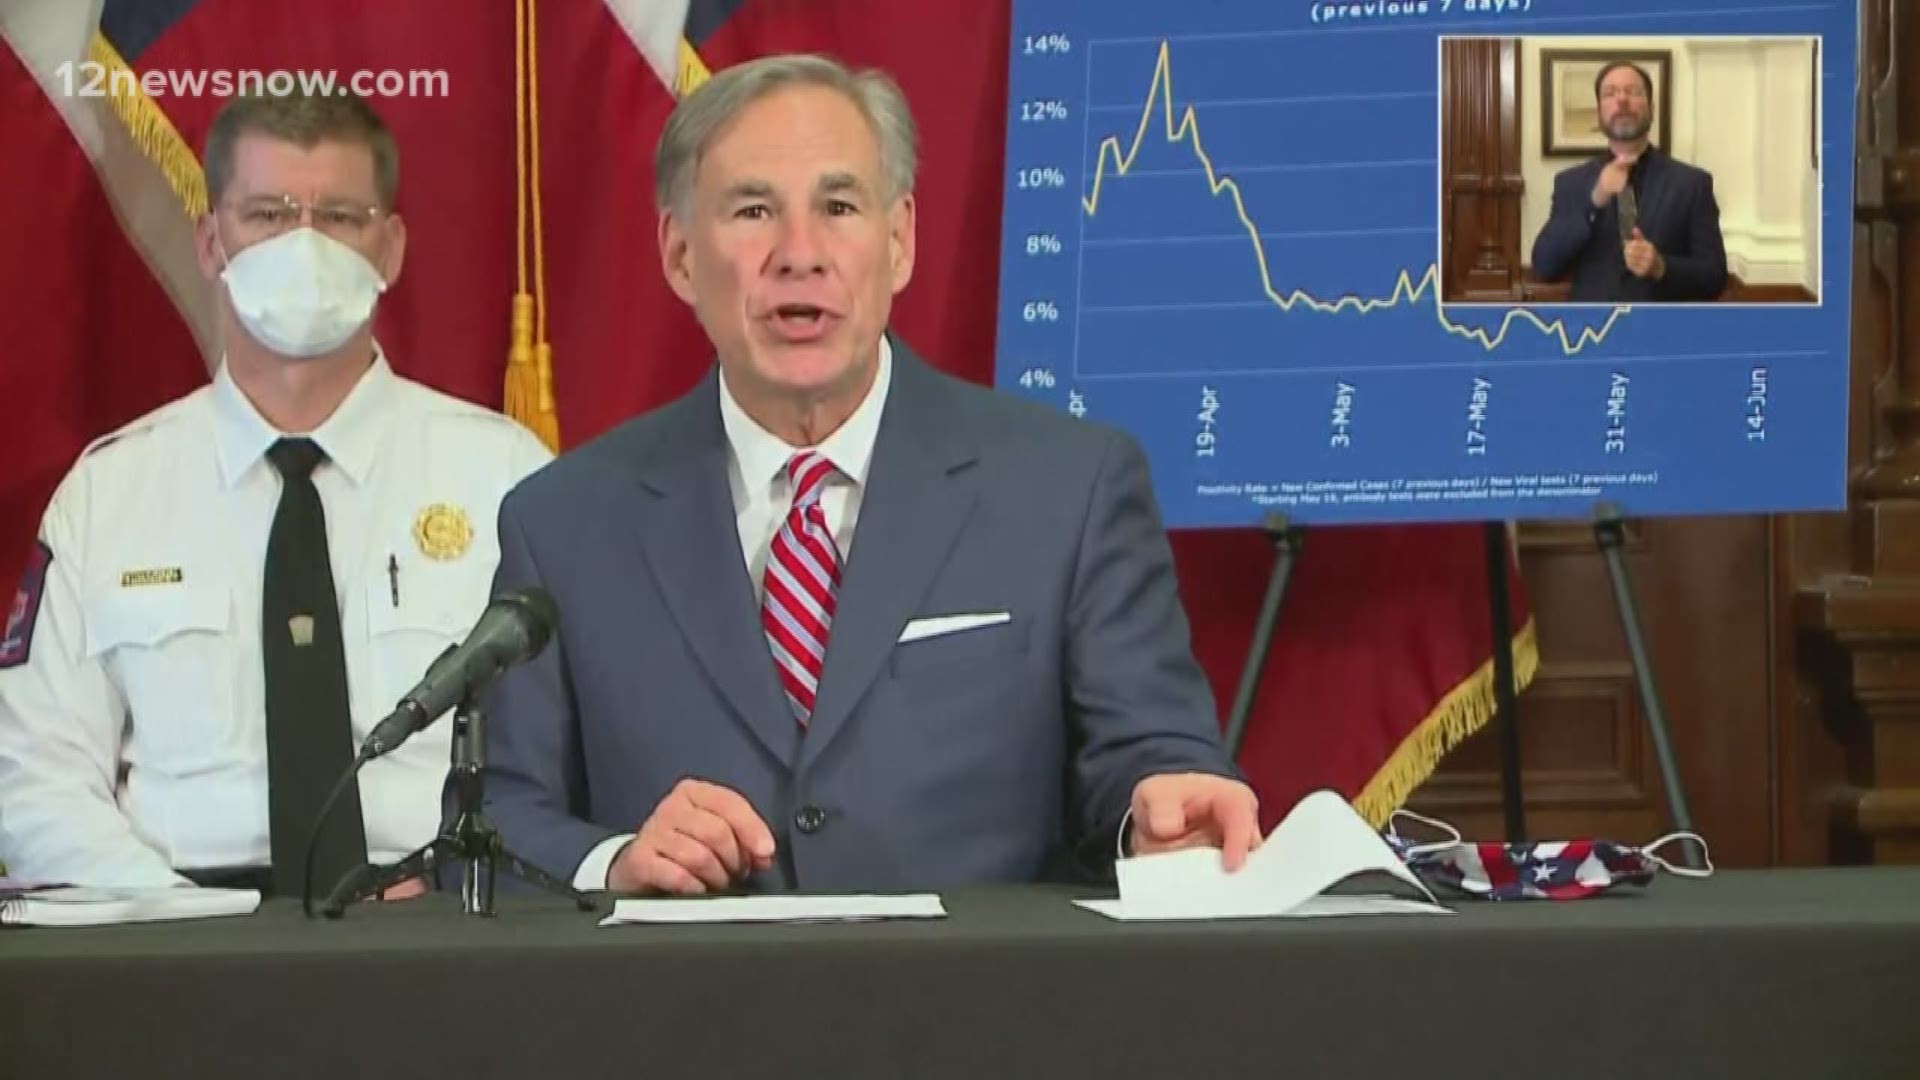 As recent COVID-19 cases continue to spike the Texas Governor has no plans to pull back on re-opening of but Louisiana's governor has taken a different approach.